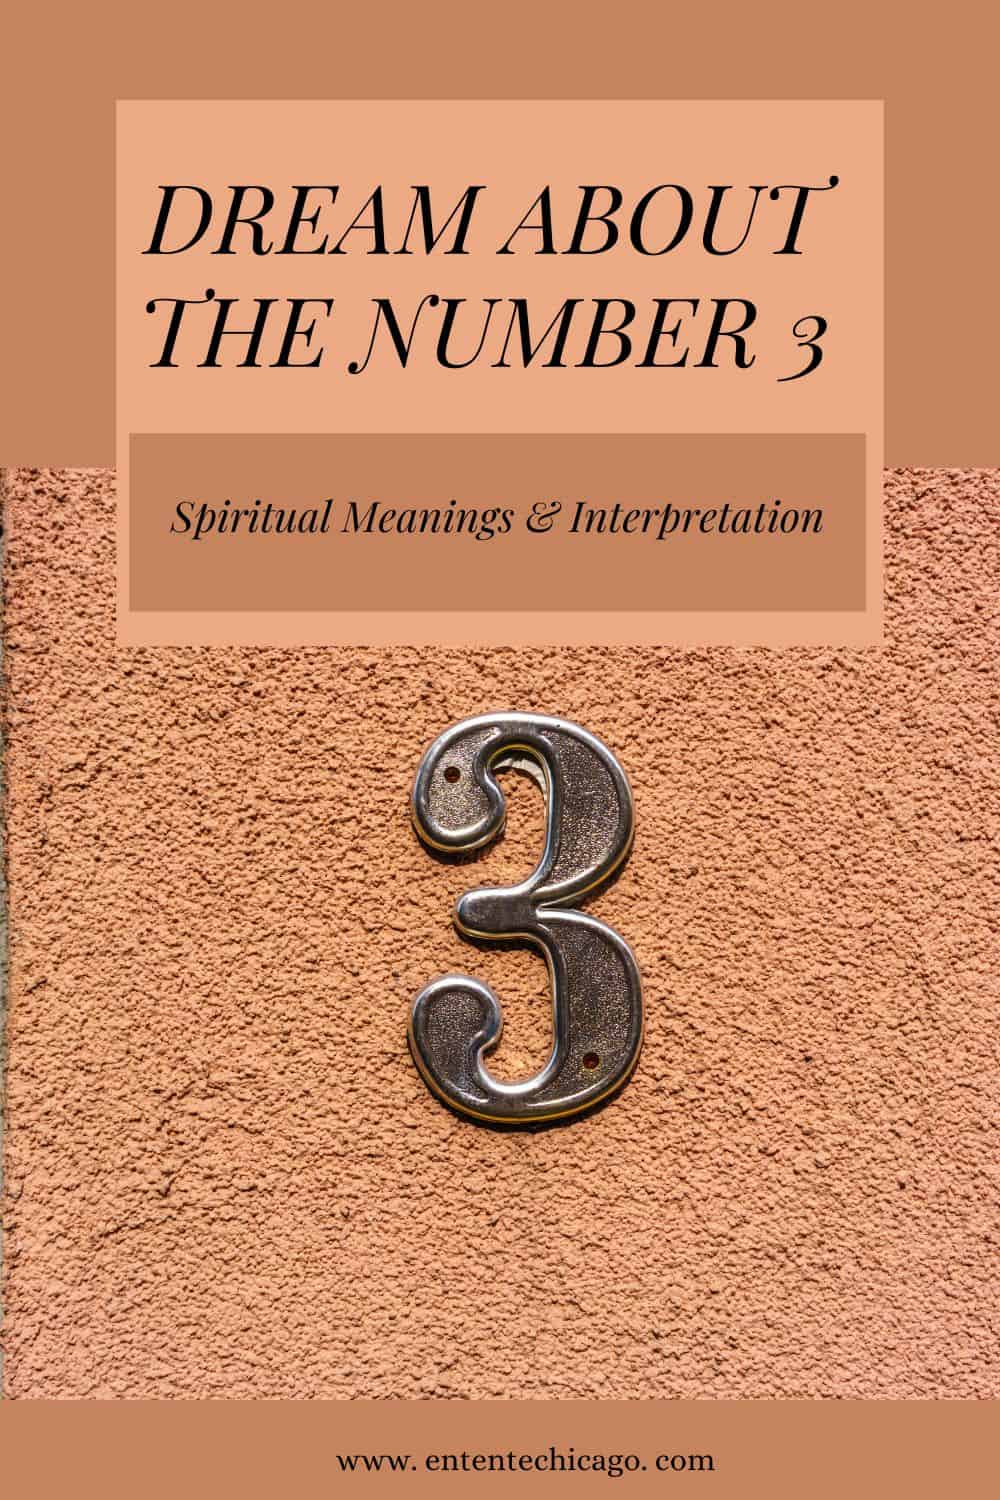 Dream About The Number 3 (Spiritual Meanings & Interpretation)